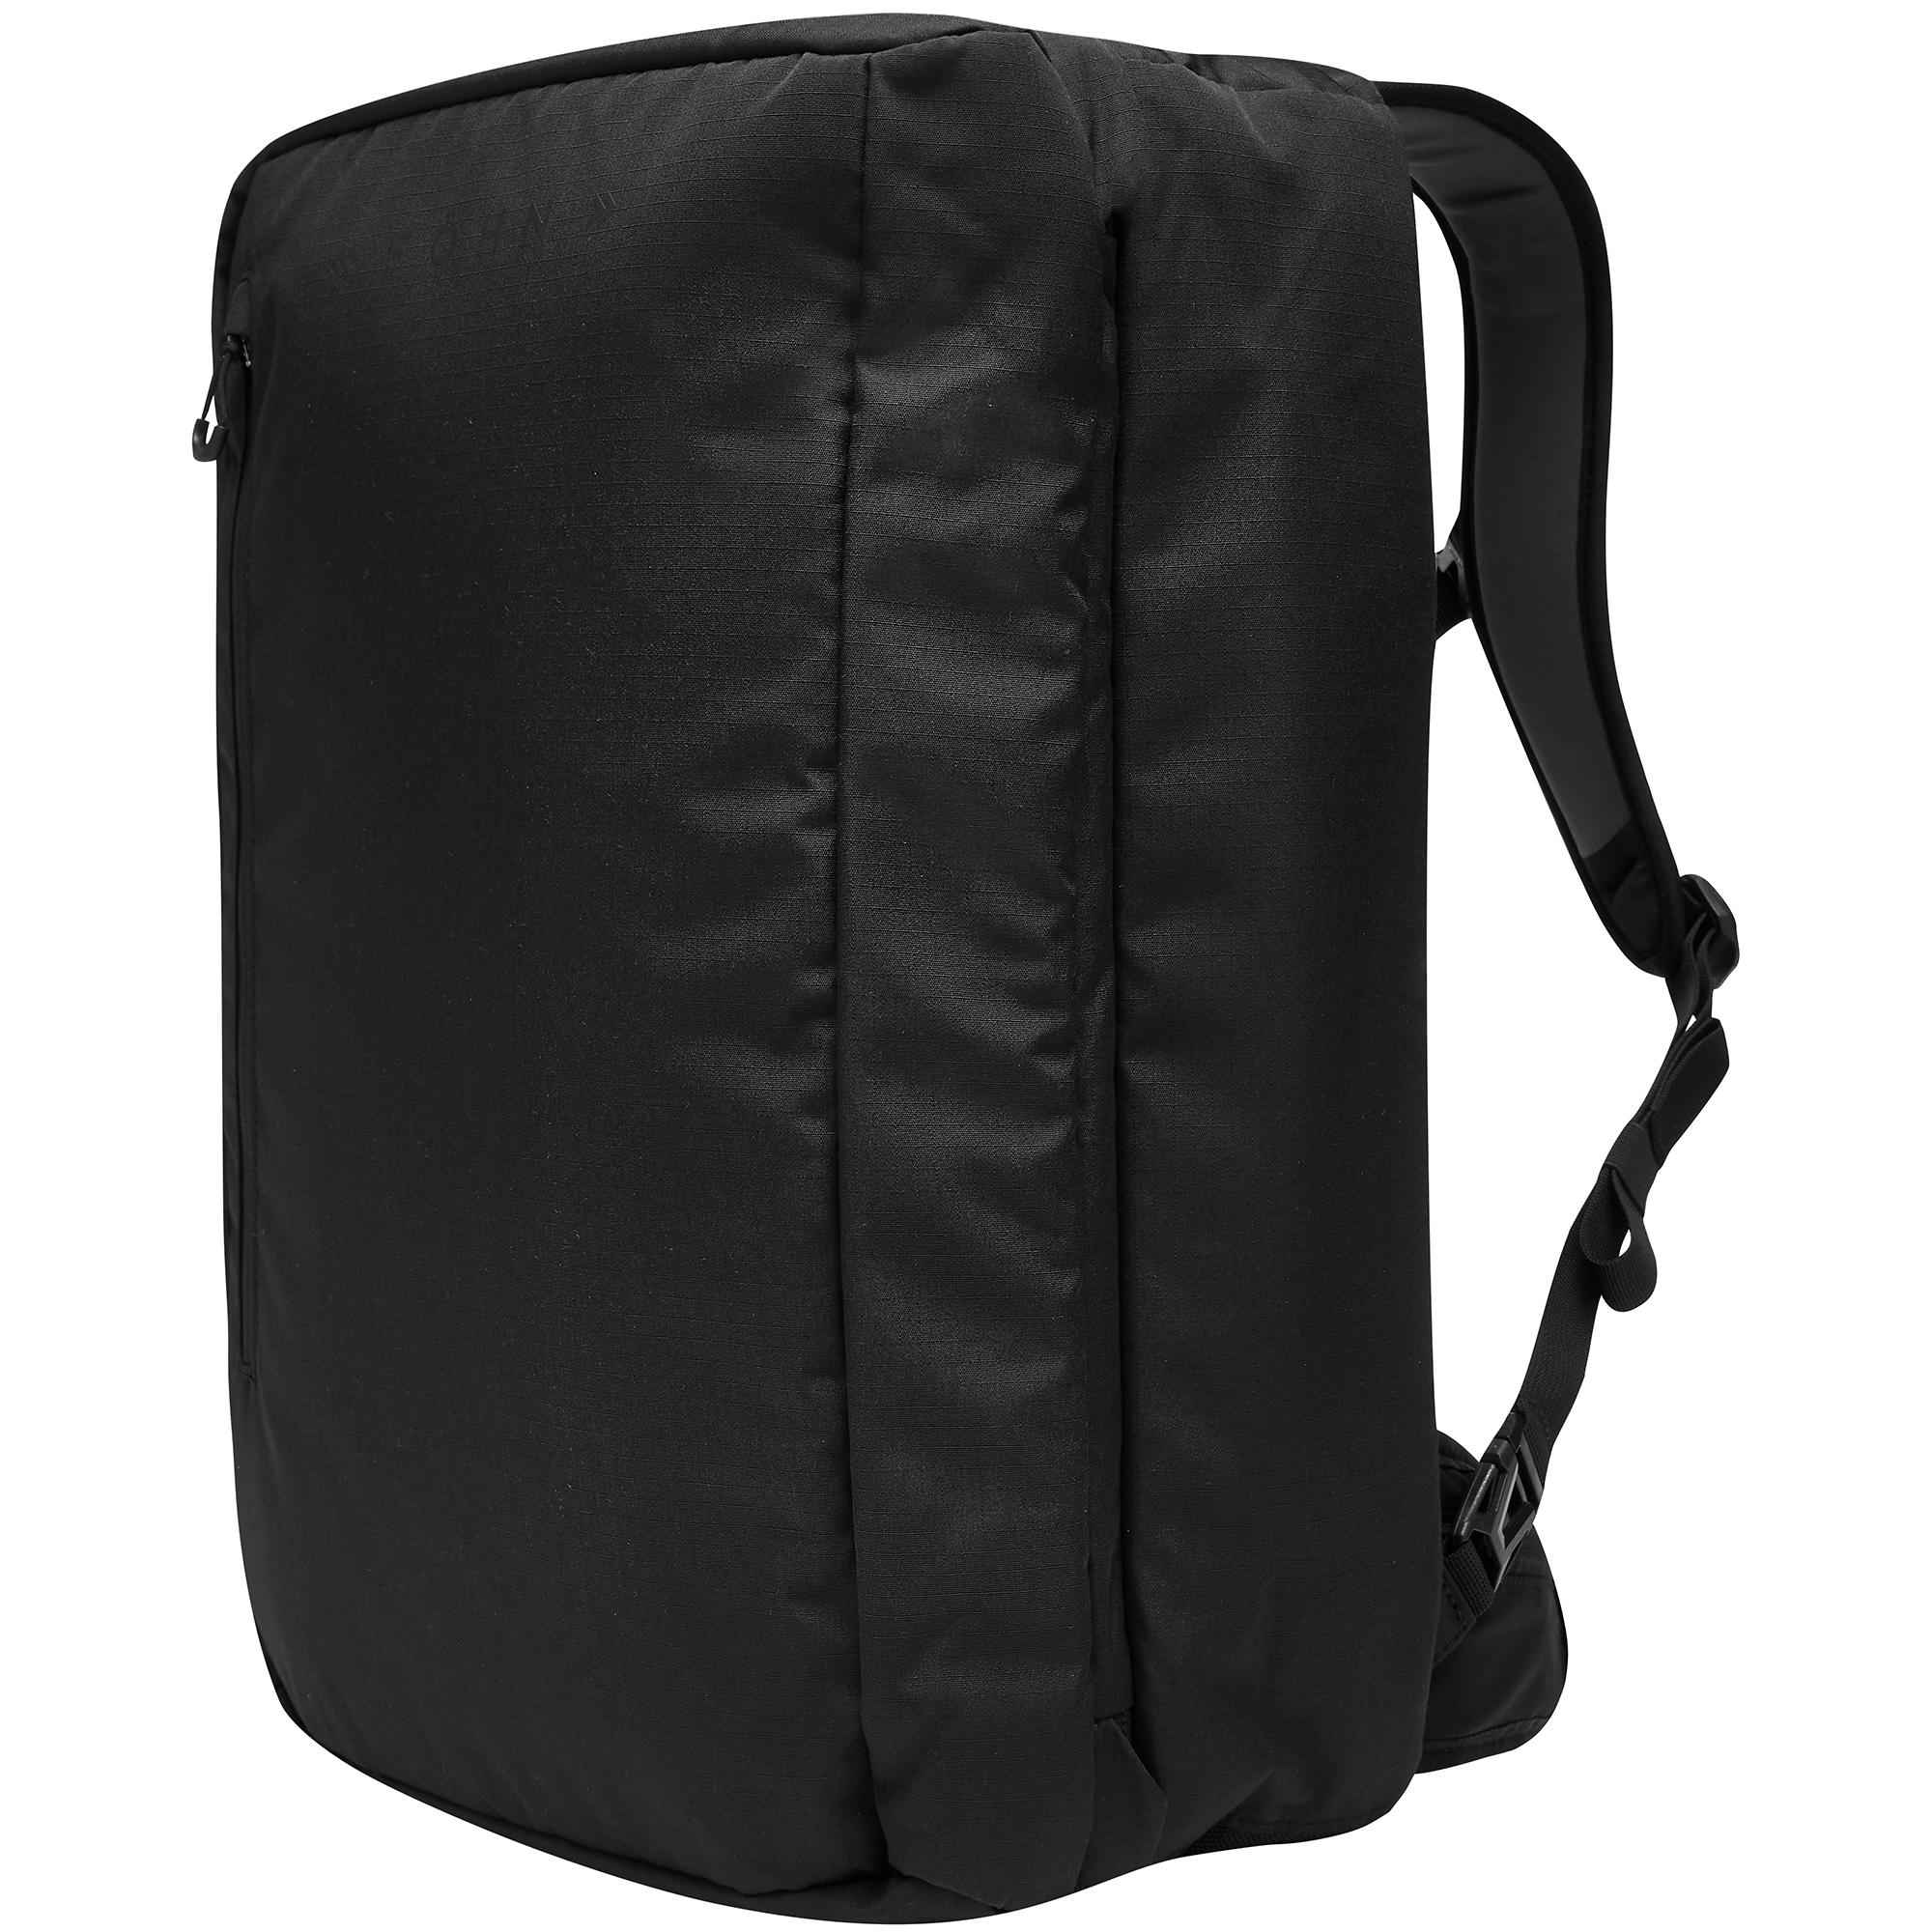 Fhn 40l Travel Carry On Backpack - Black